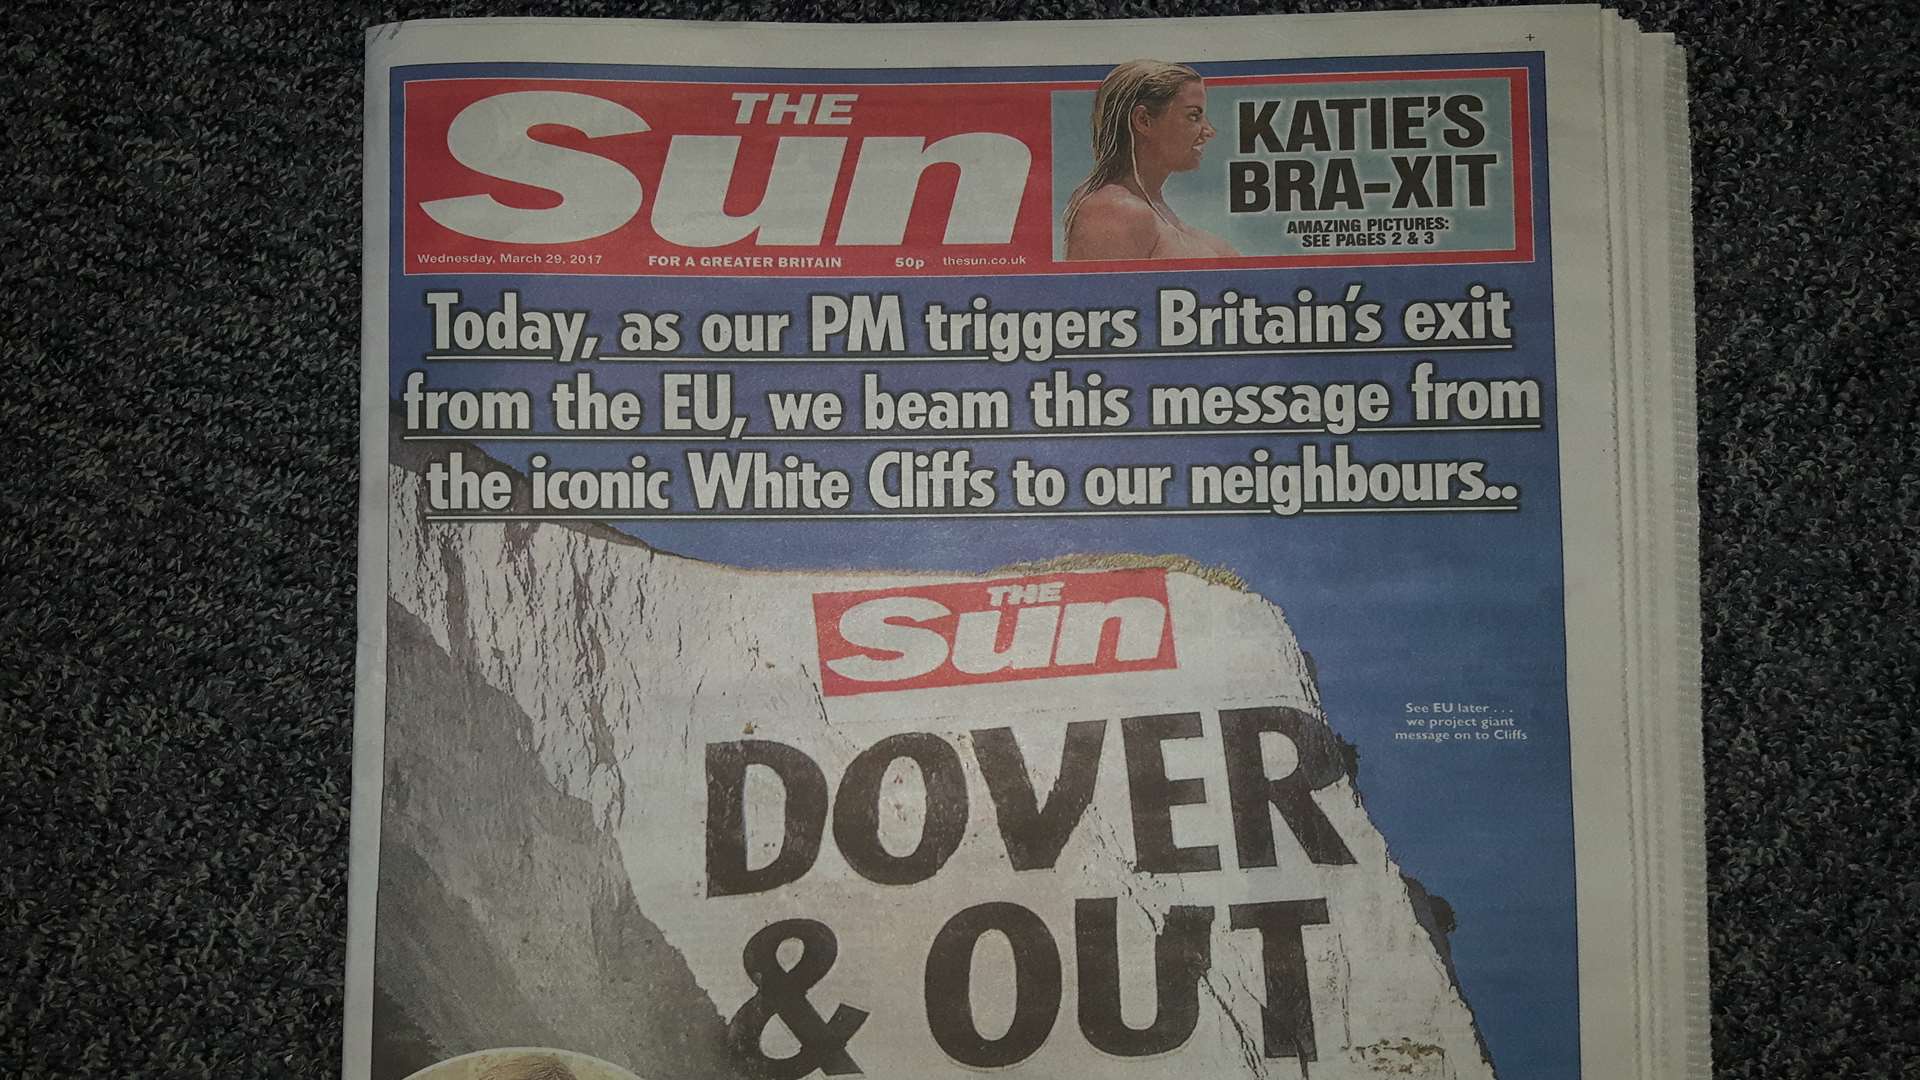 The Sun newspaper's front page today.